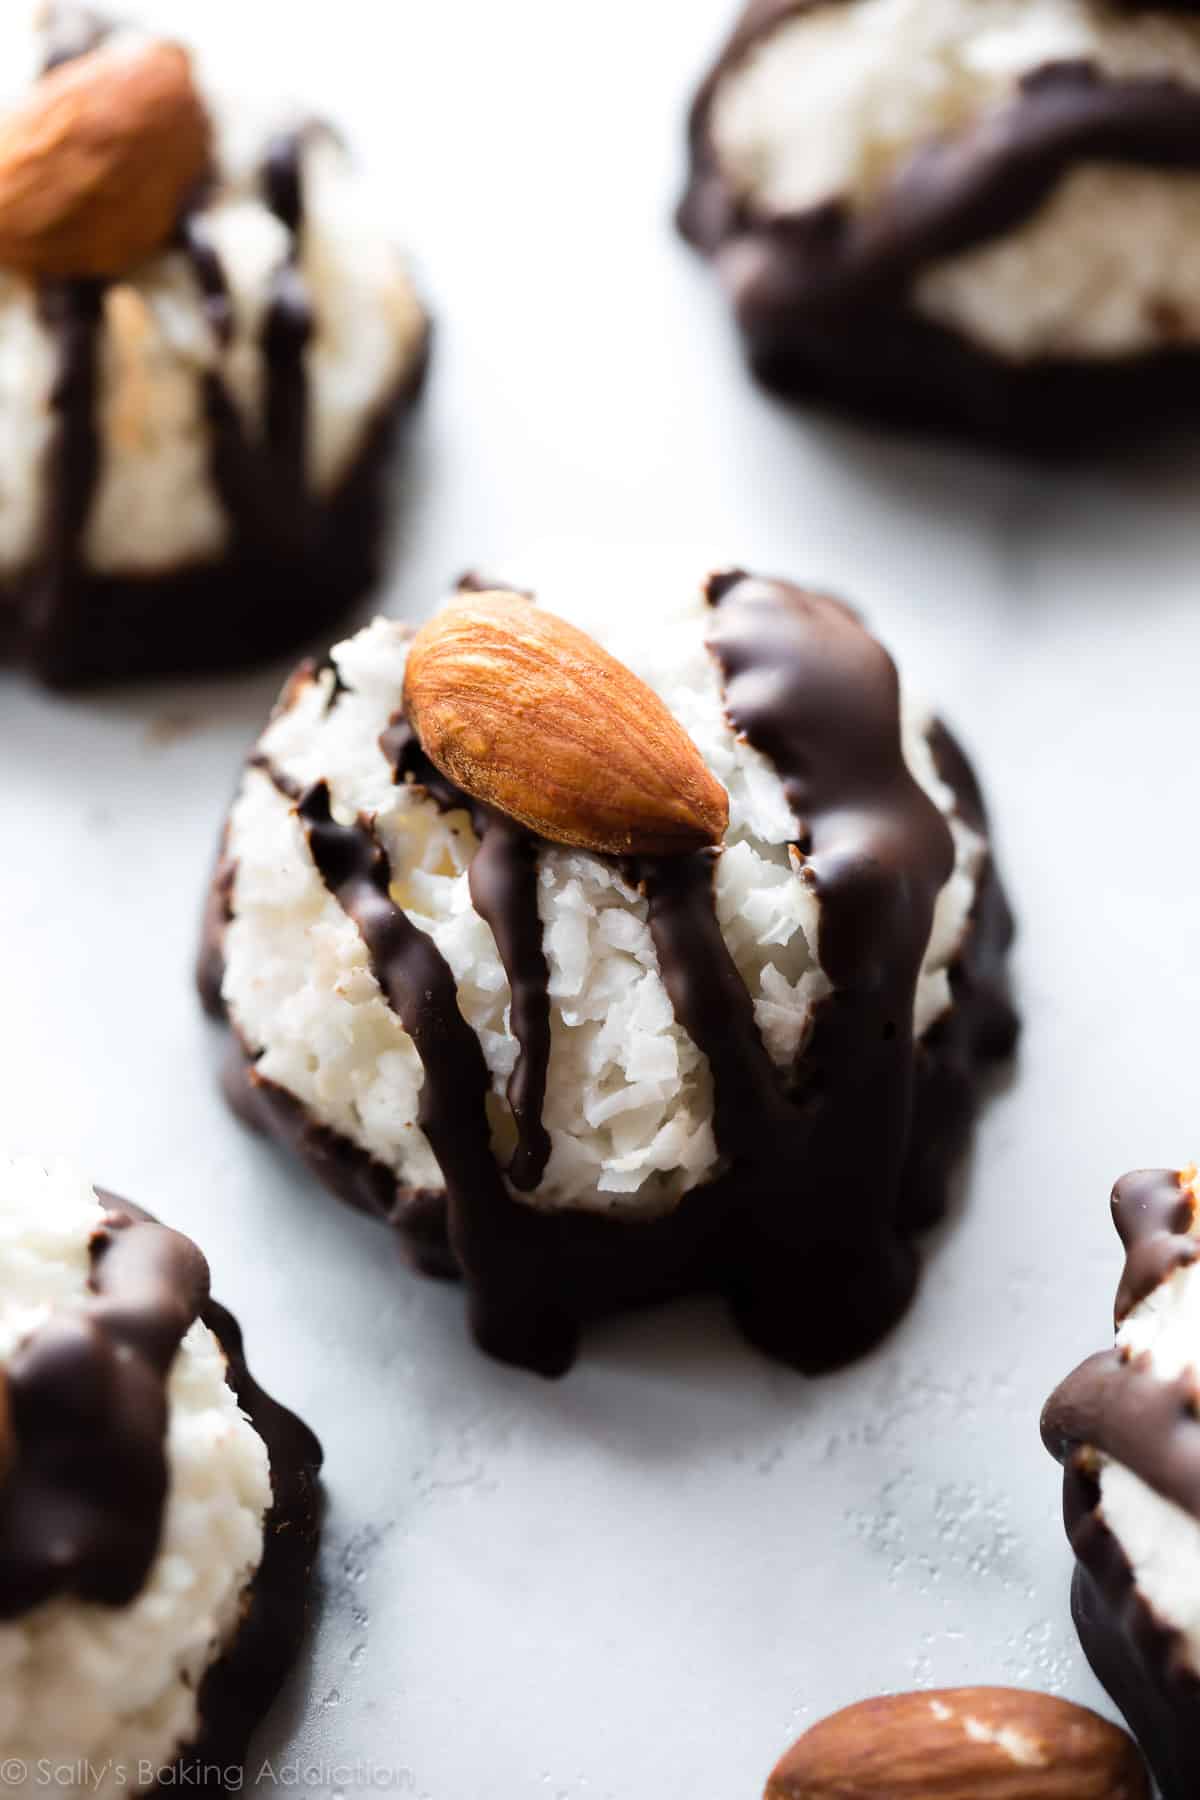 Coconut macaroons drizzled with dark chocolate